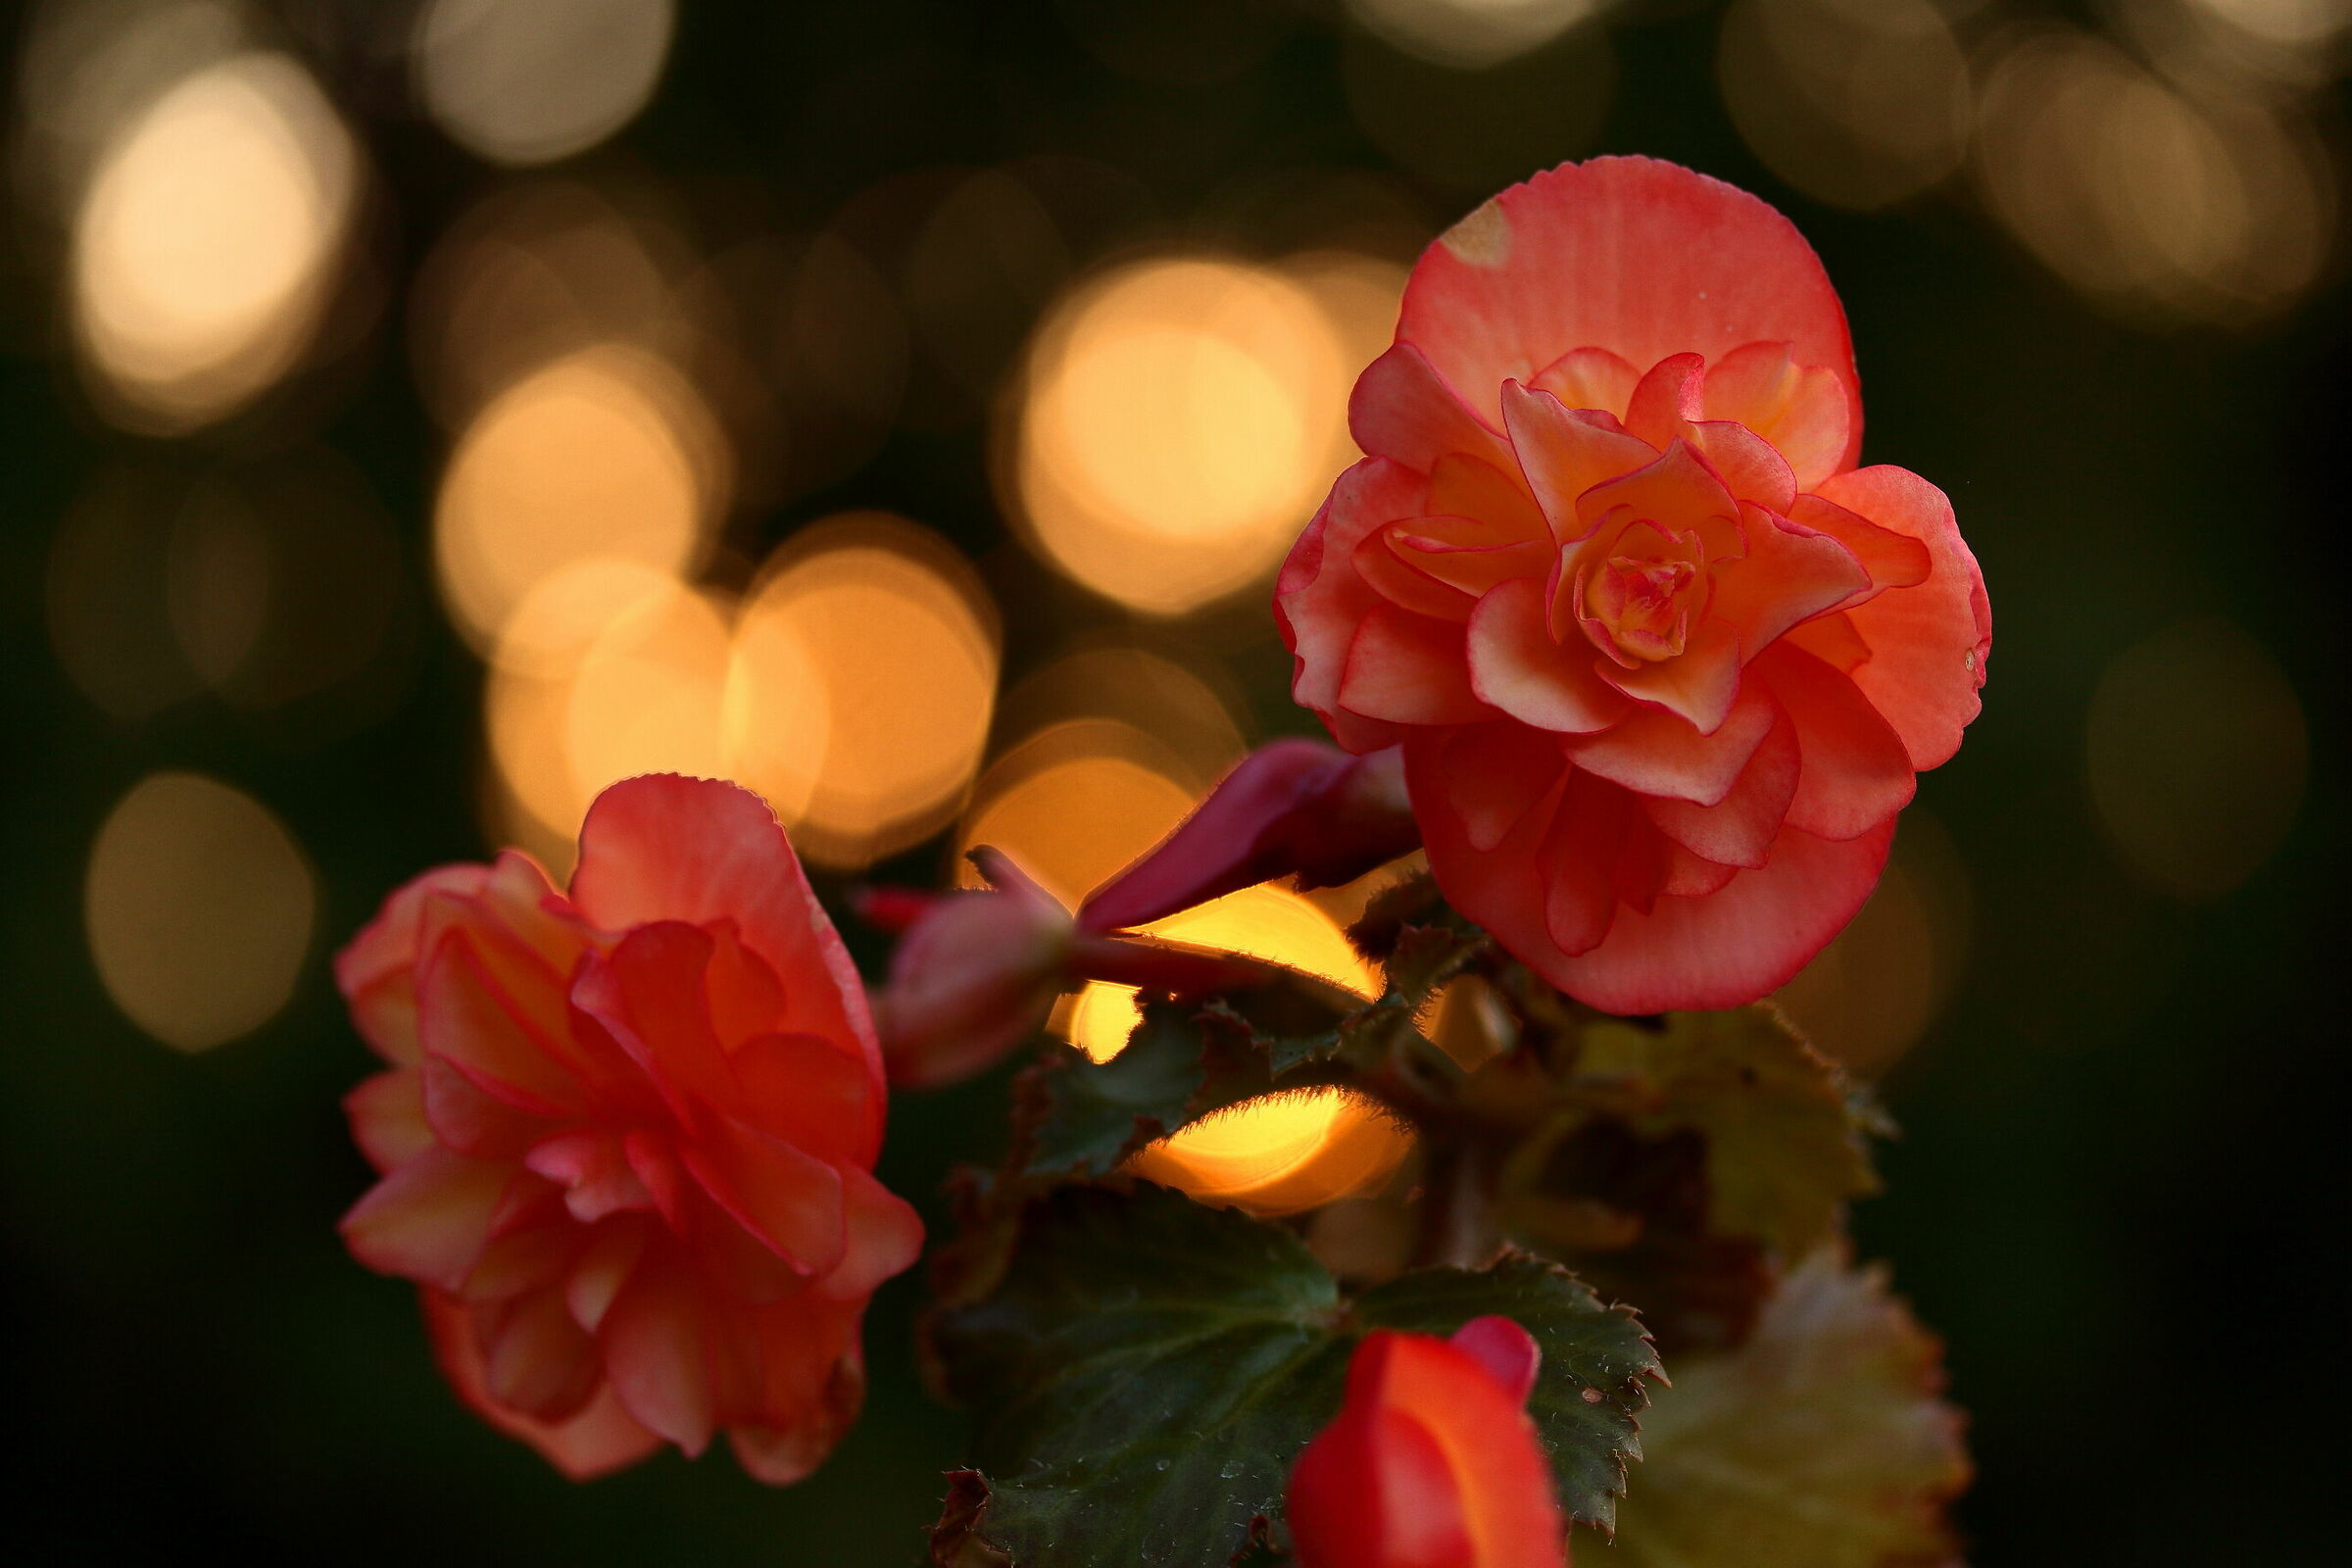 Begonia col tramonto alle spalle...